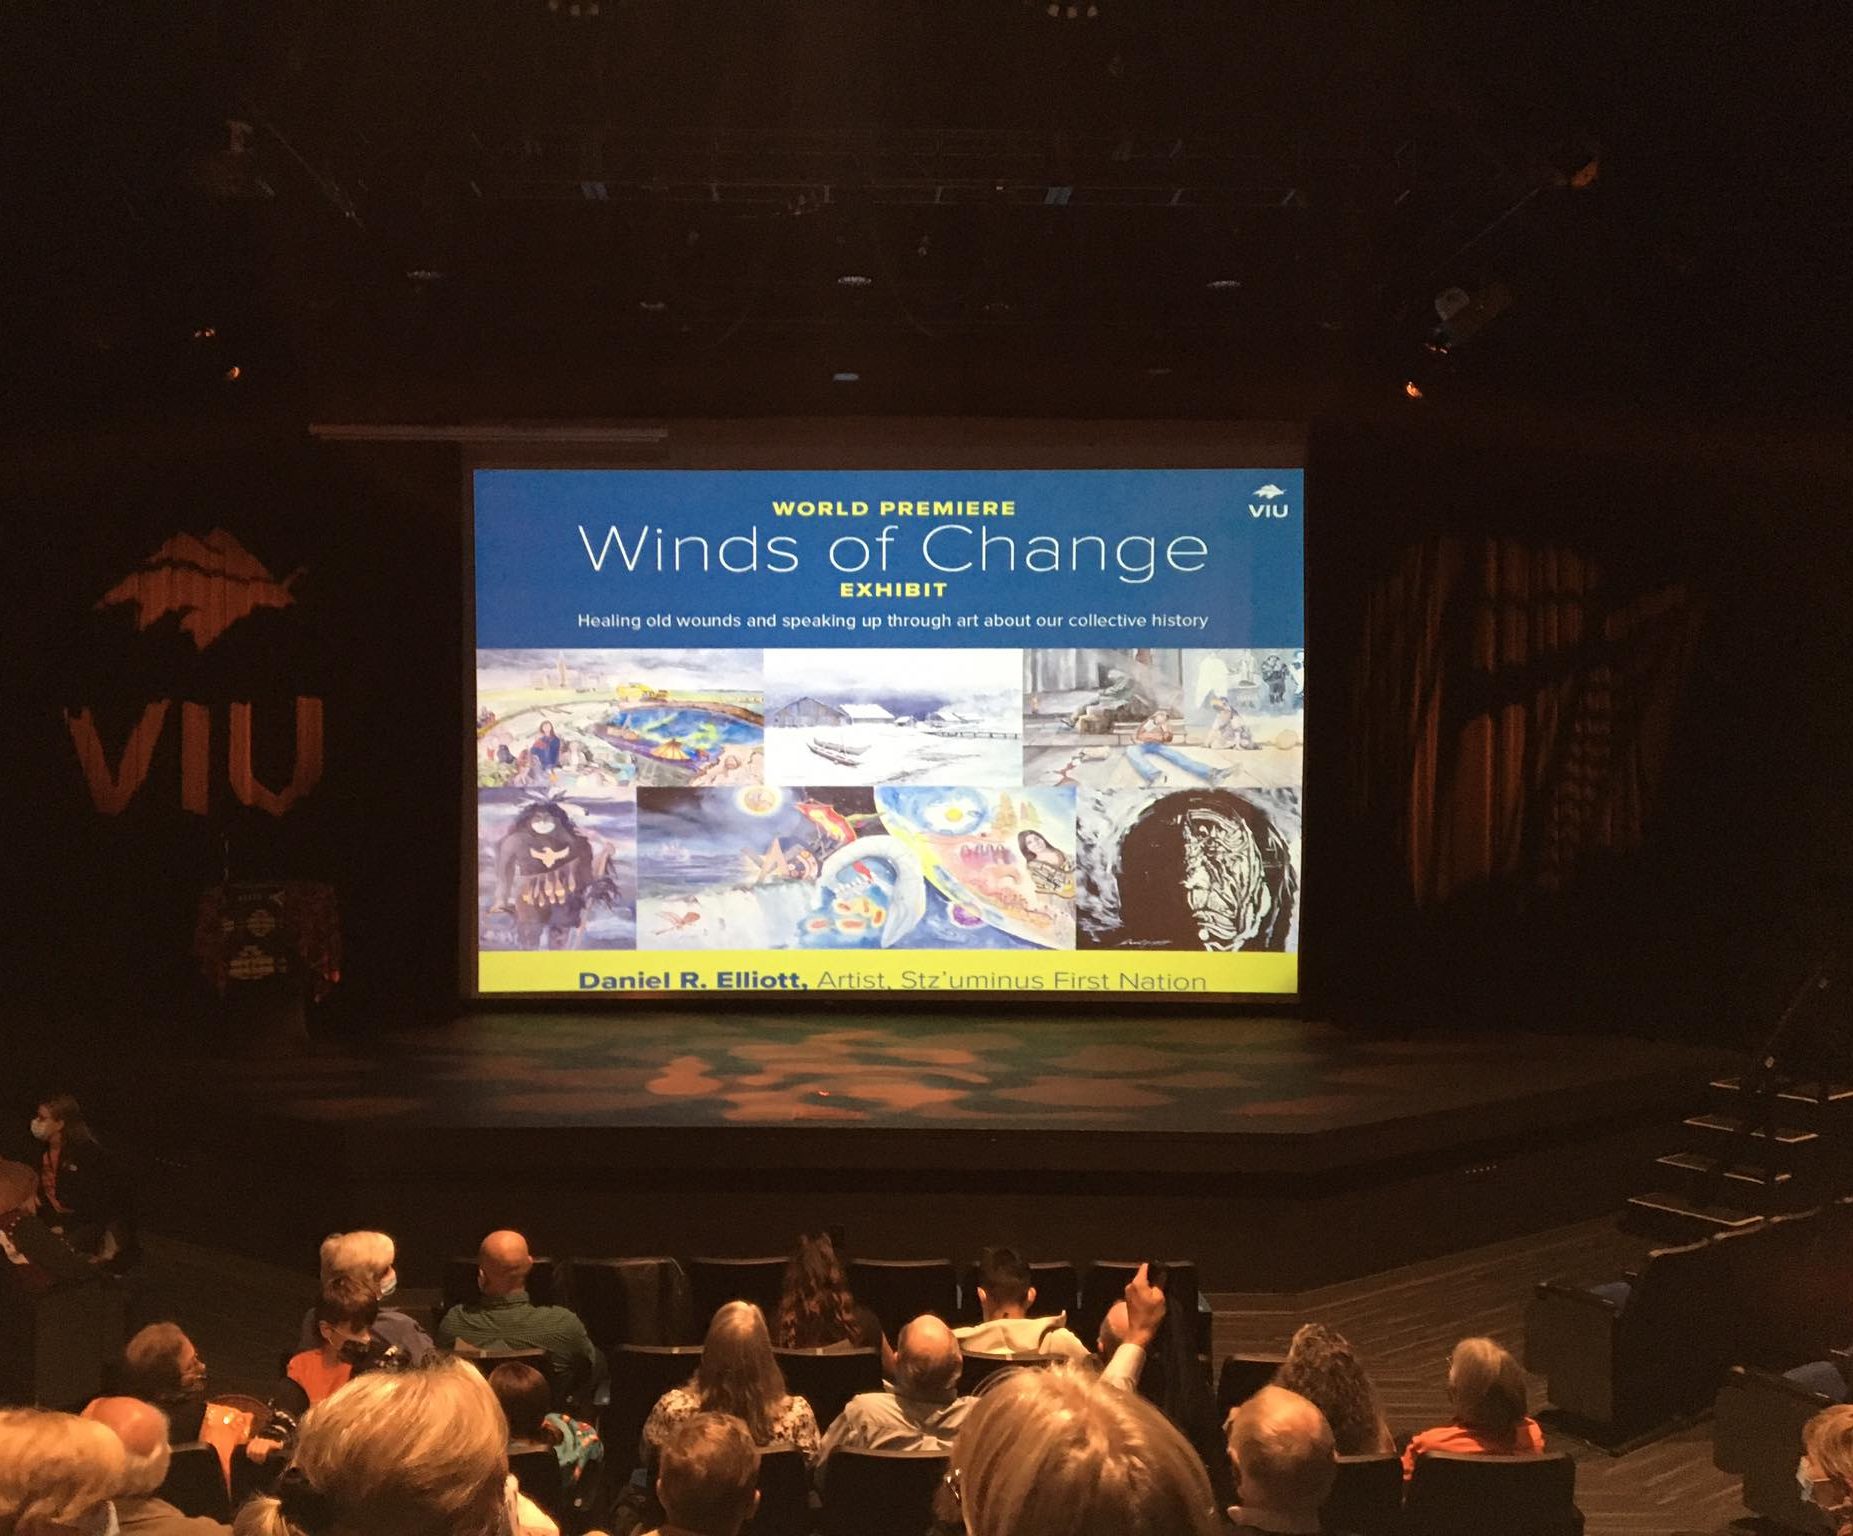 Image shows Winds of Changes poster on theatre stage